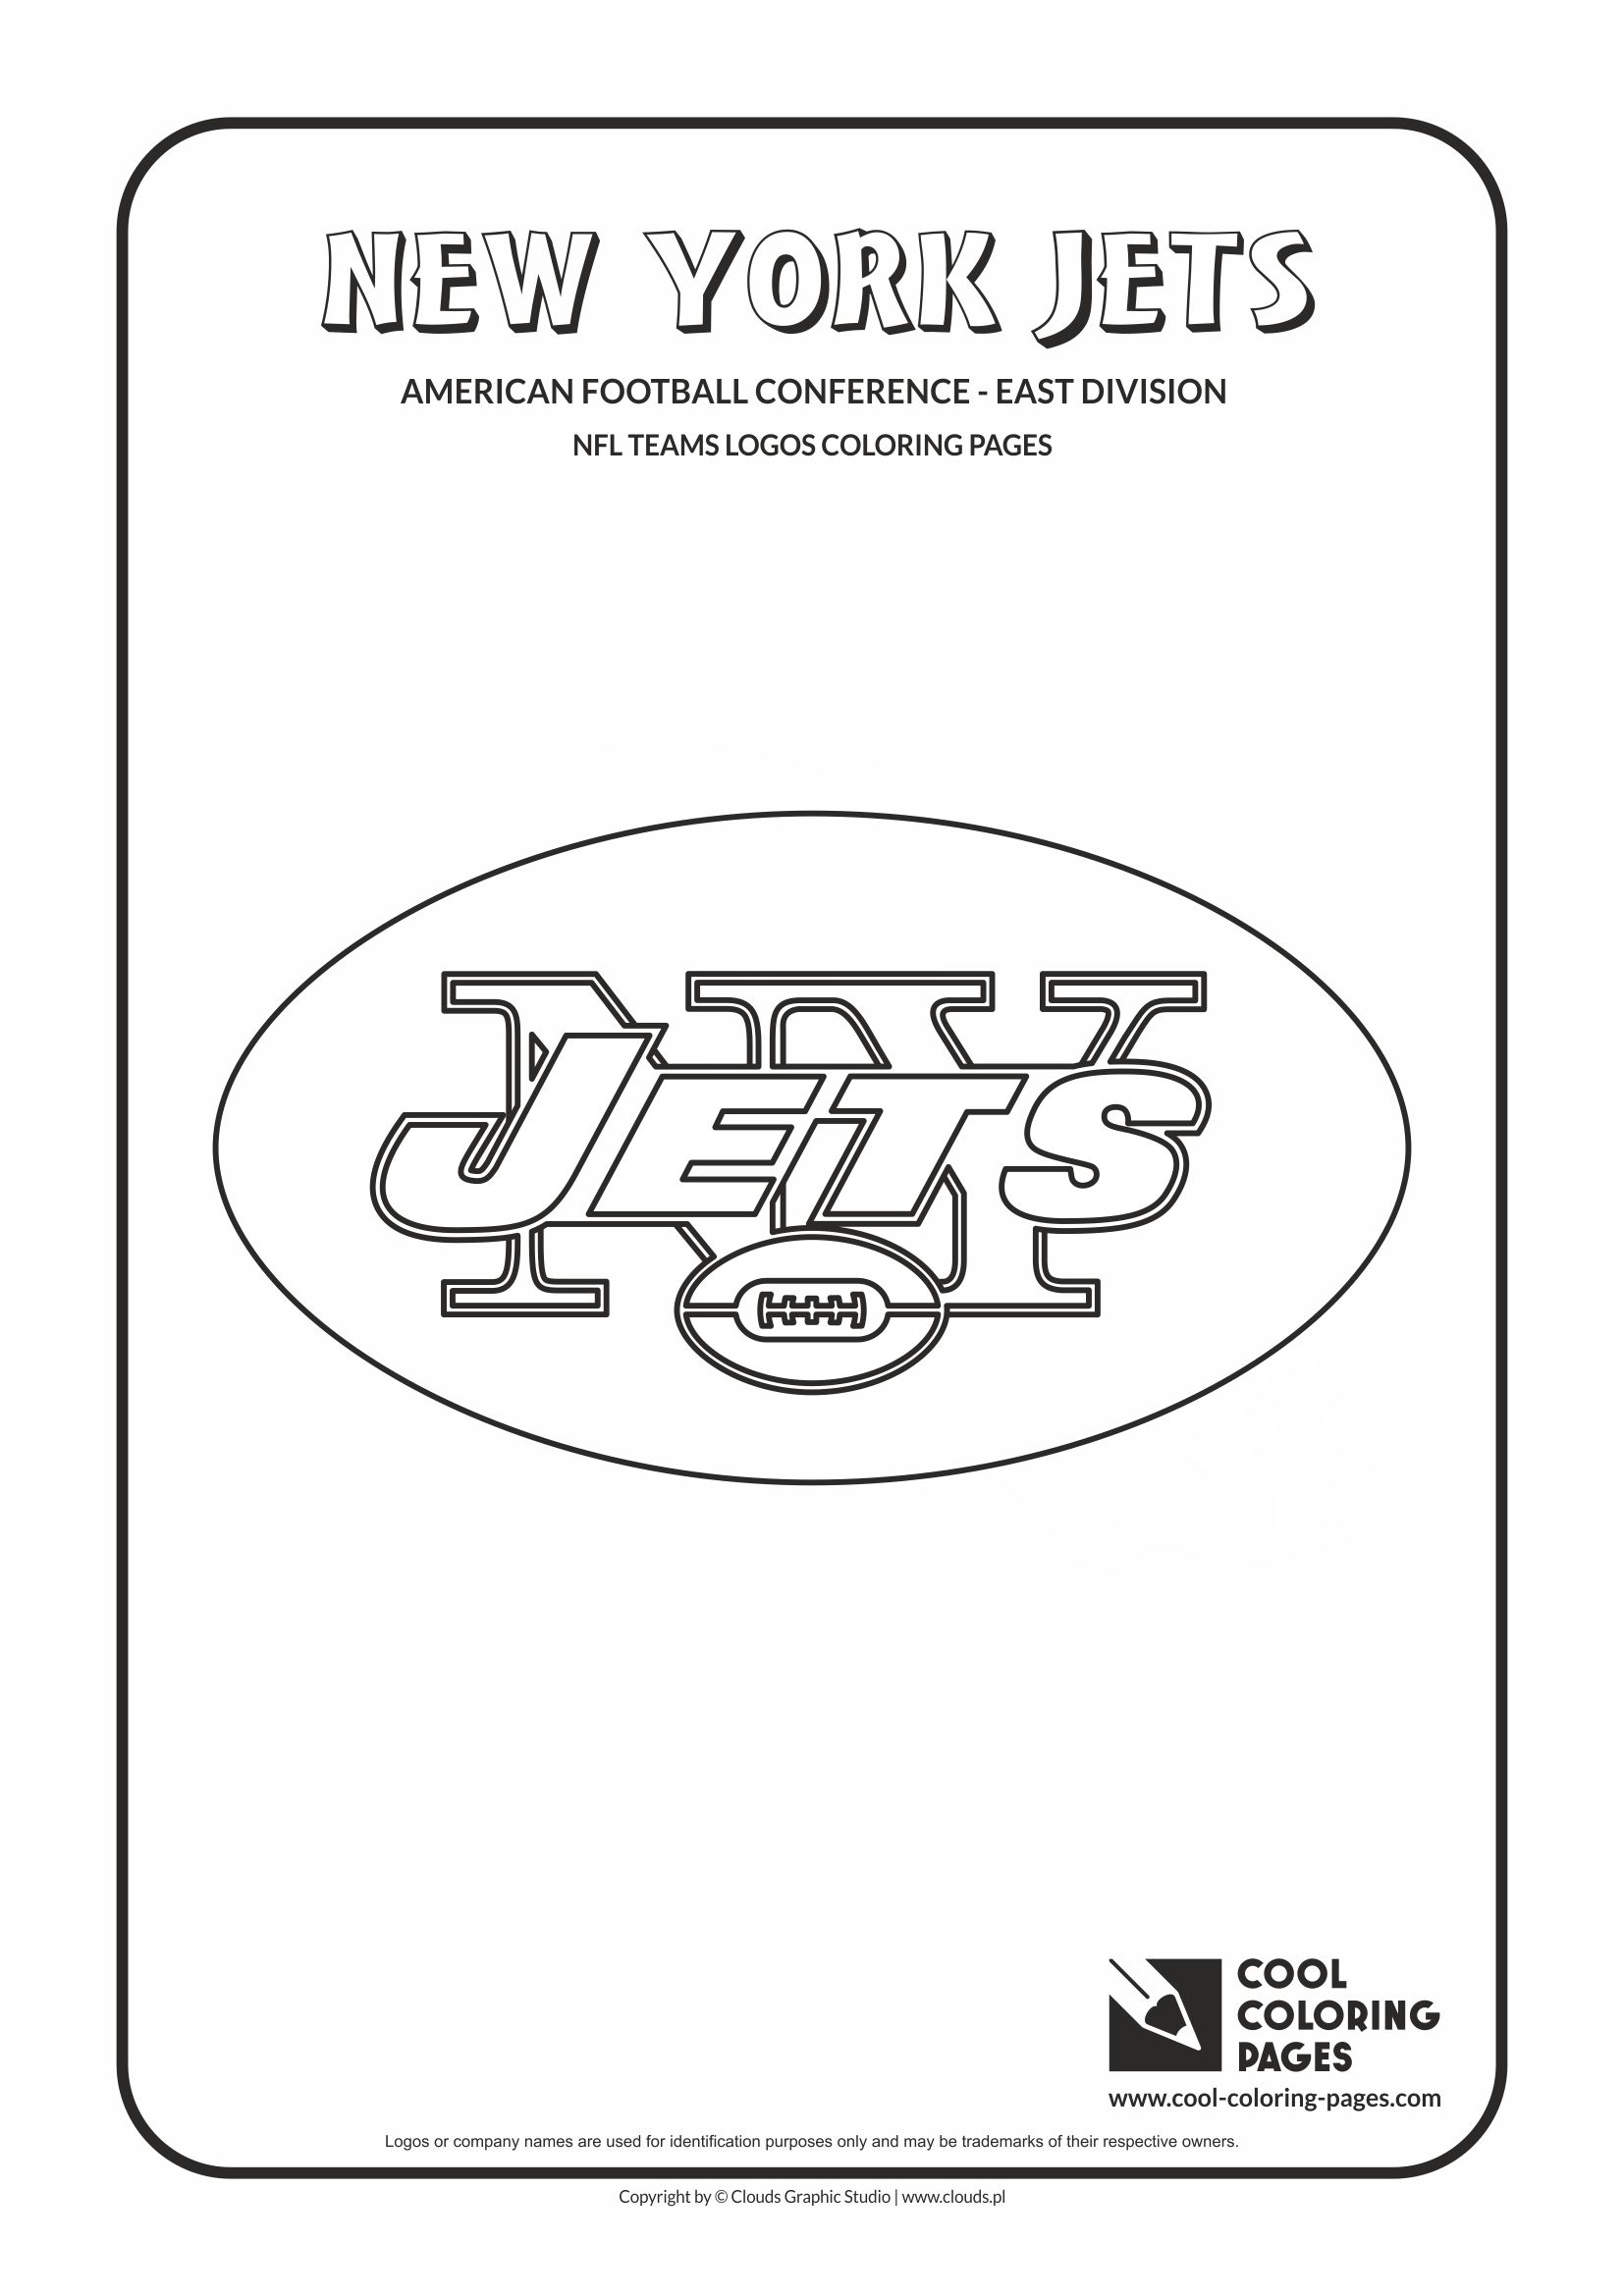 Cool Coloring Pages - NFL American Football Clubs Logos - American Football Conference - East Division / New York Jets logo / Coloring page with New York Jets logo